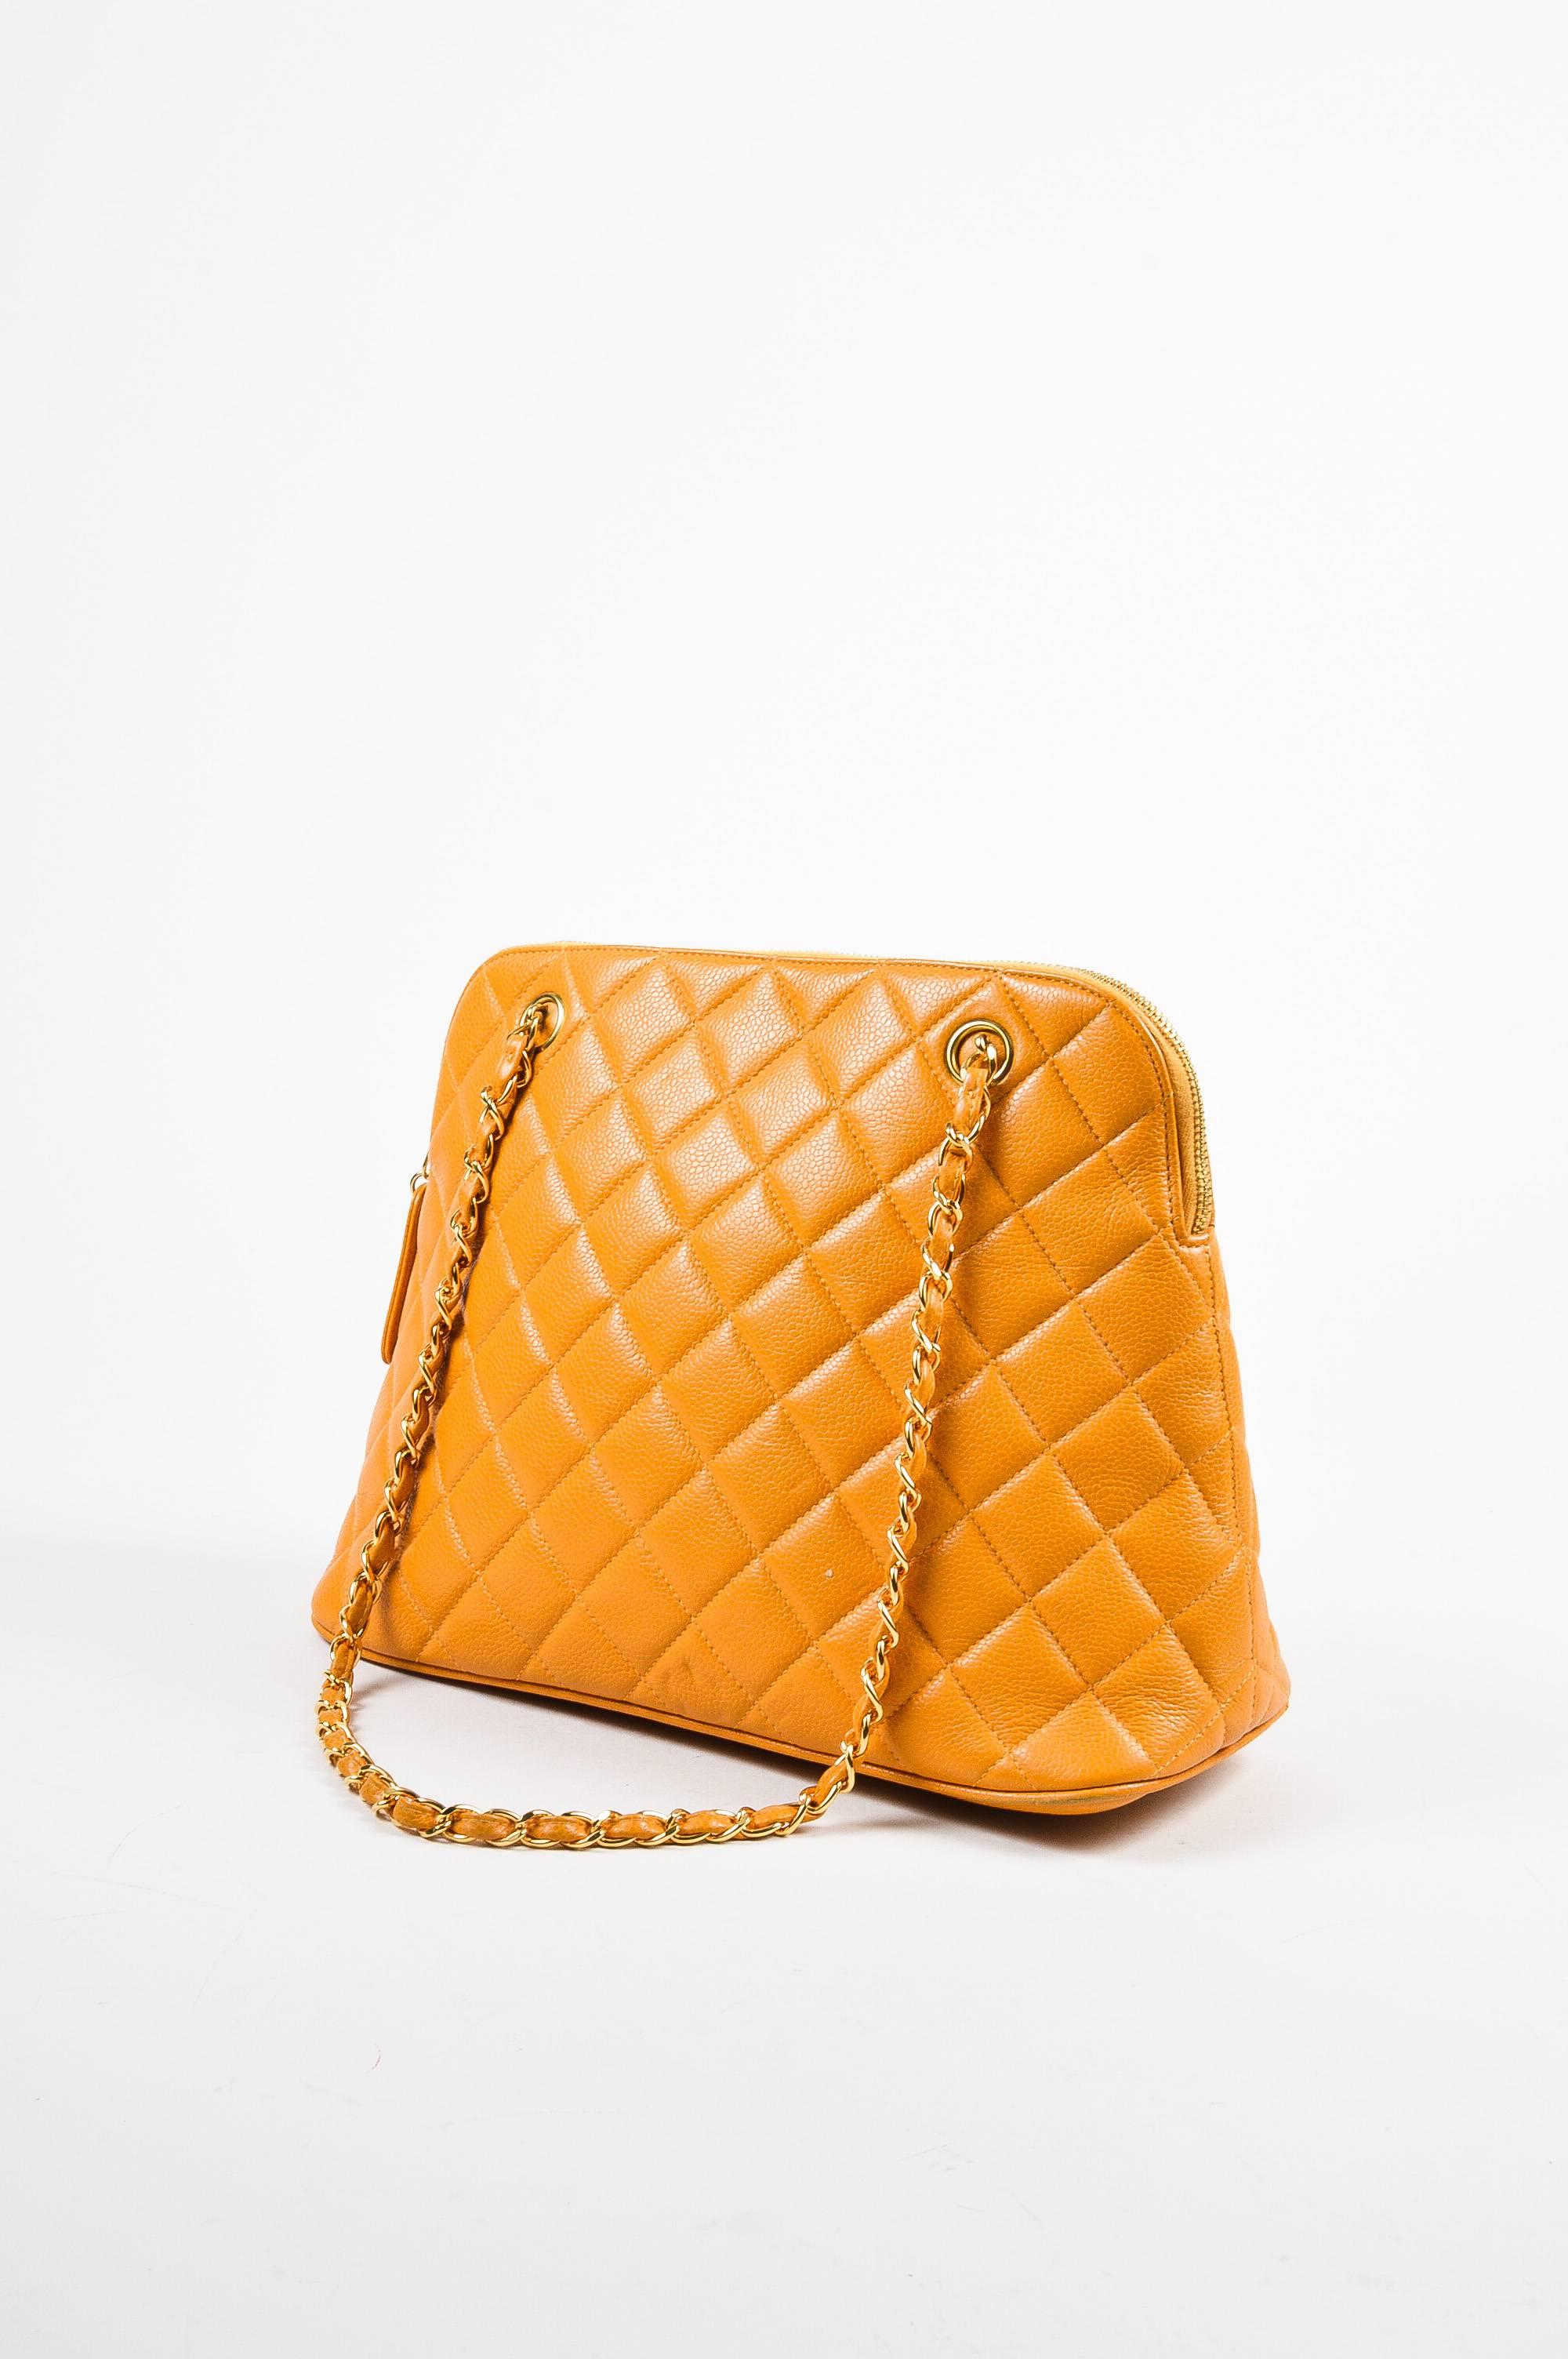 Bright and summery shoulder bag constructed of marigold orange caviar leather bag circa 1996-1997. Diamond-quilting. Gold-tone hardware. Dual chain link shoulder straps with leather weaving. Unexpected 'CC' stitched logo on base. Zips closed around